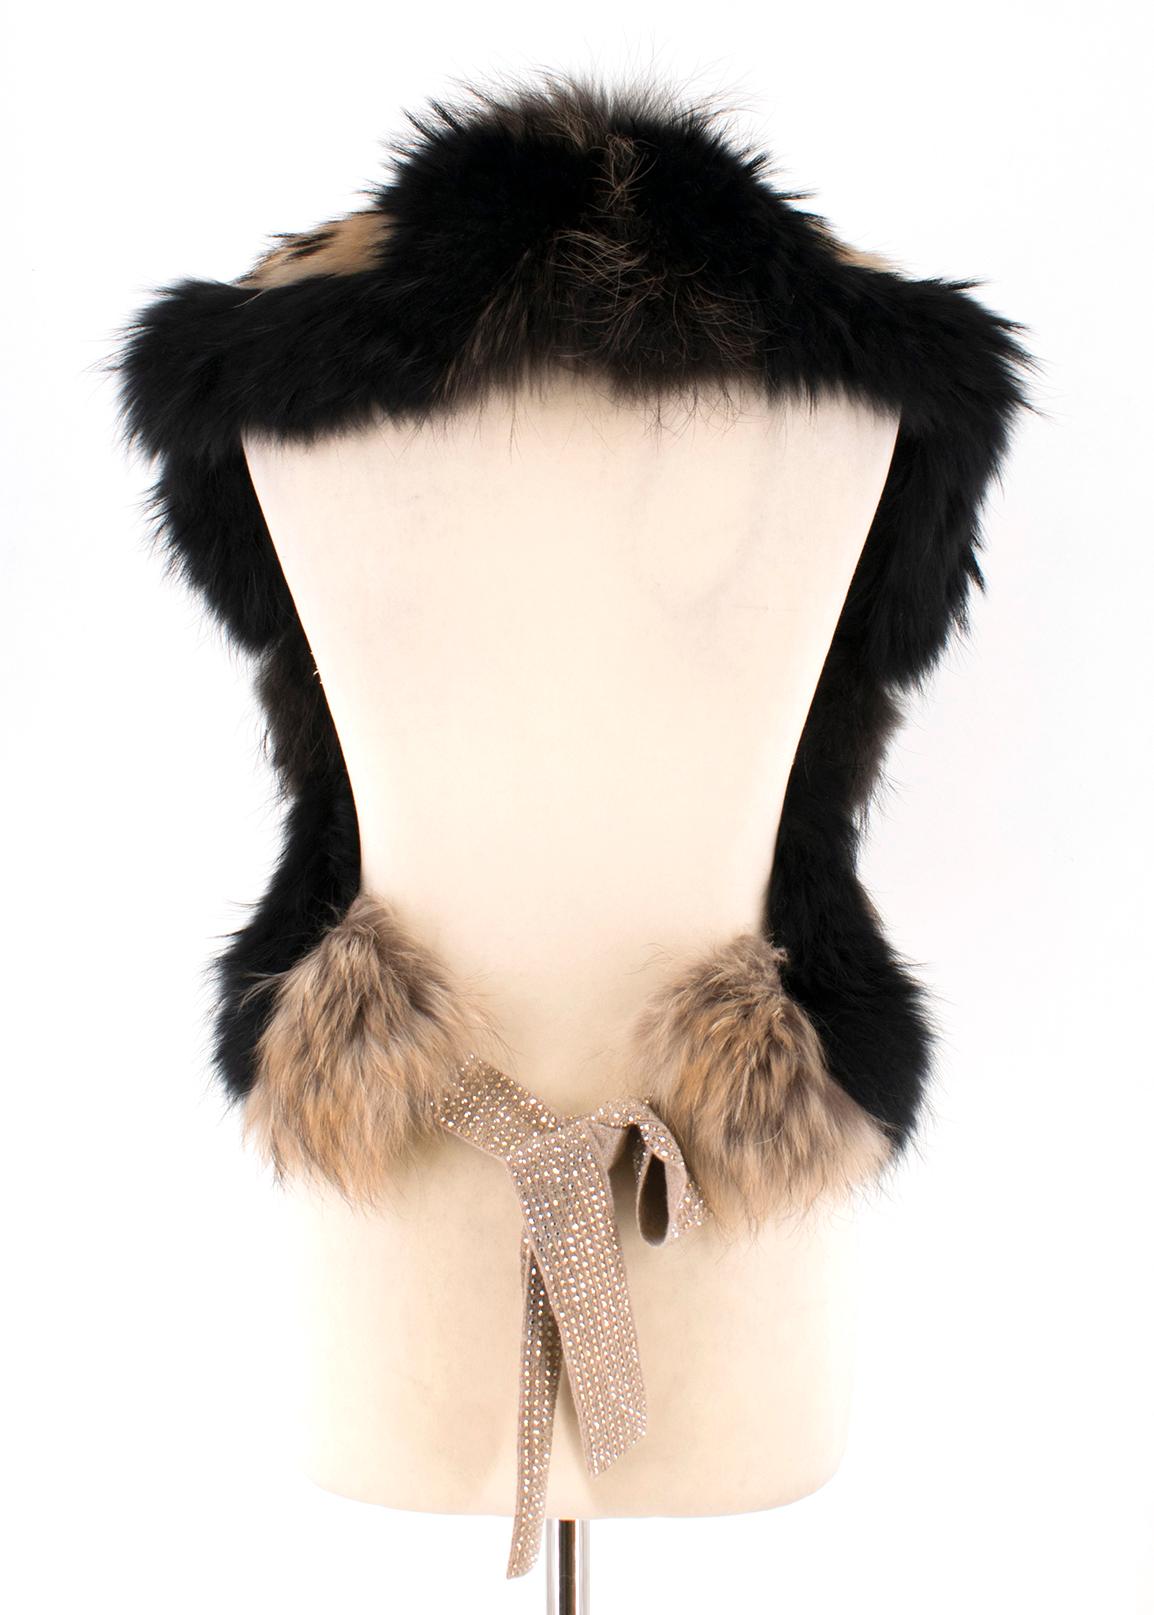 William Sharp fox fur shawl 

- Black and tonal-brown with black tips, mid-weight patchwork fox fur 
- Beige knit self-fastening ties, Swarovski yellow crystal embellished 
- Black satin lining
- Can be worn off the shoulder 

Please note, these